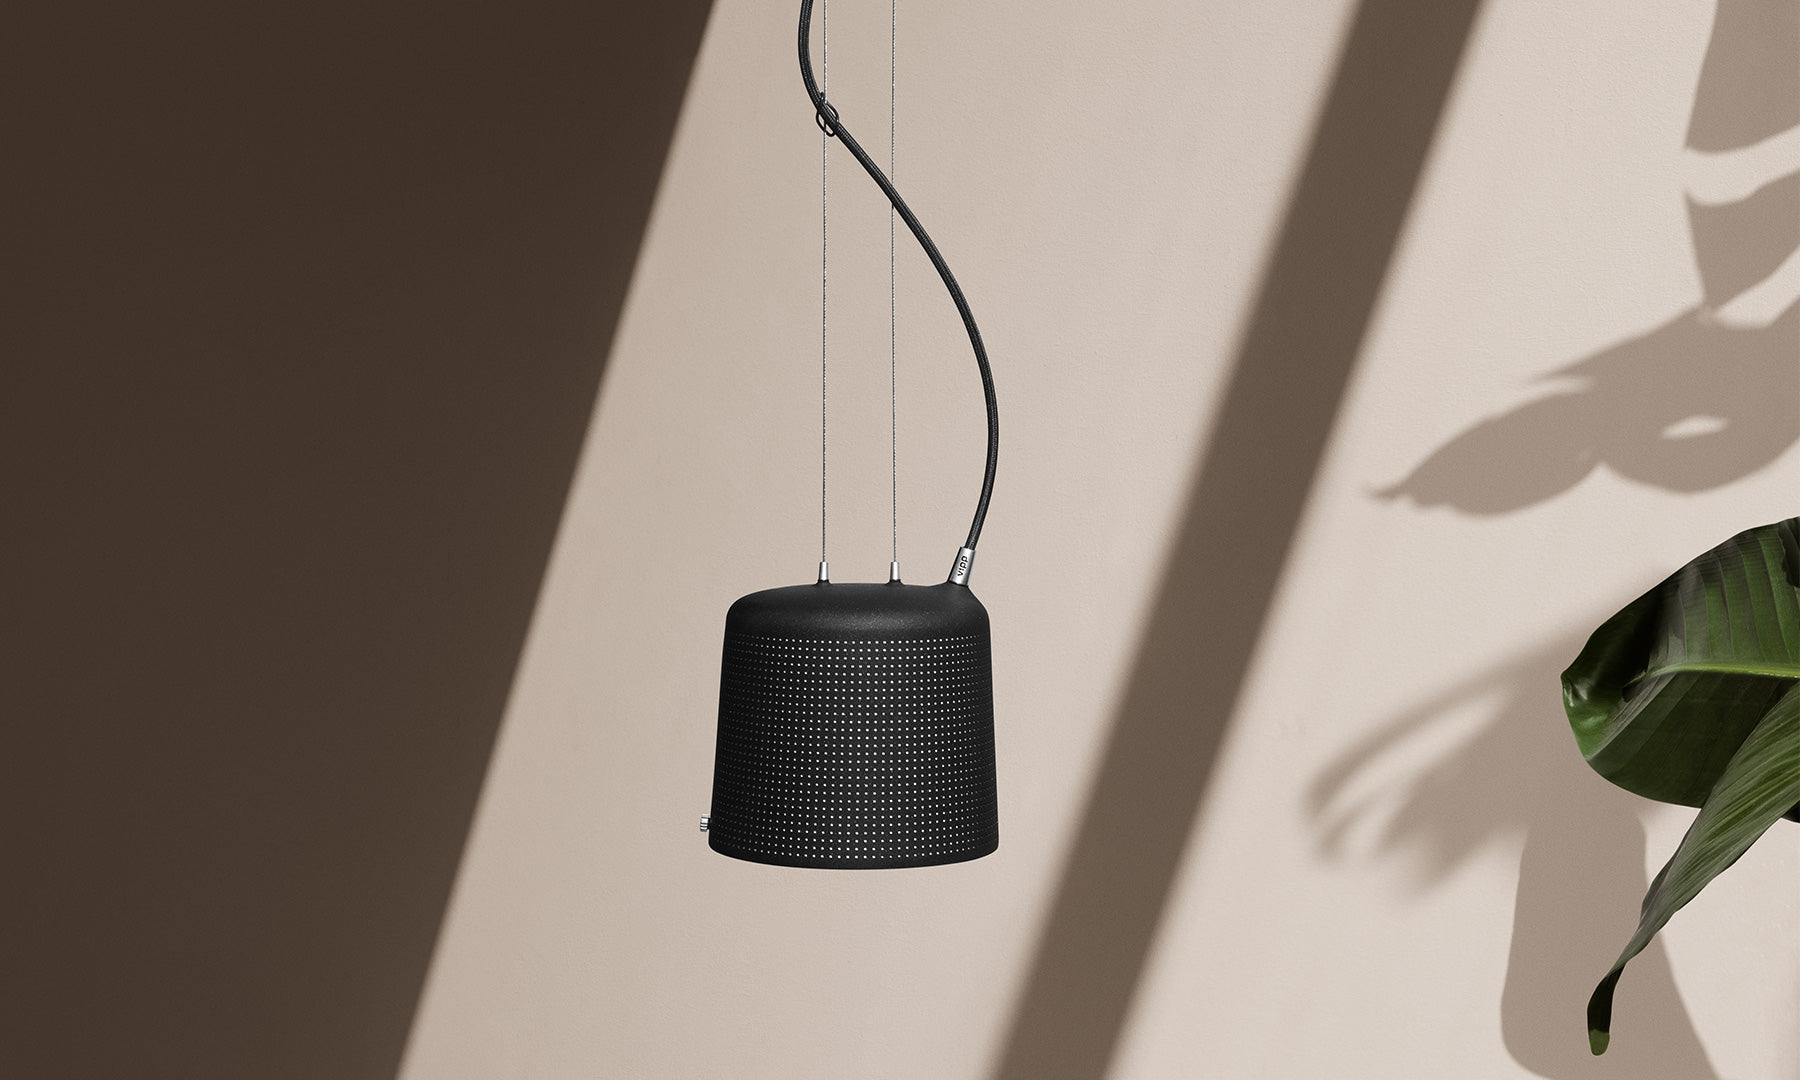 Vipp 528 Perforated Suspension Light Black Small